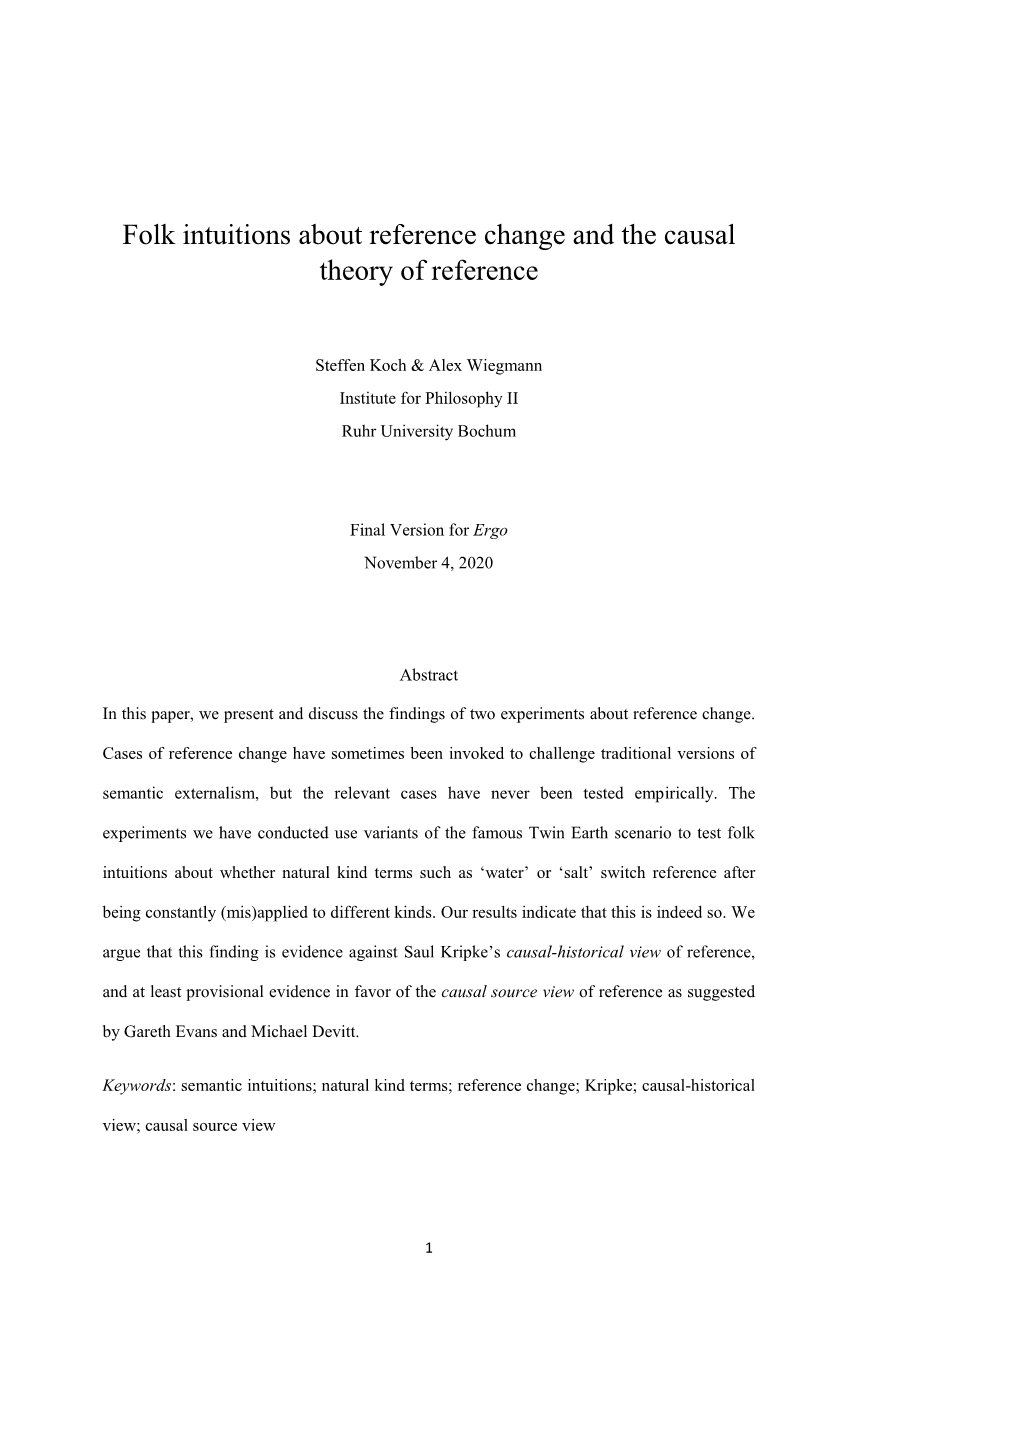 Folk Intuitions About Reference Change and the Causal Theory of Reference